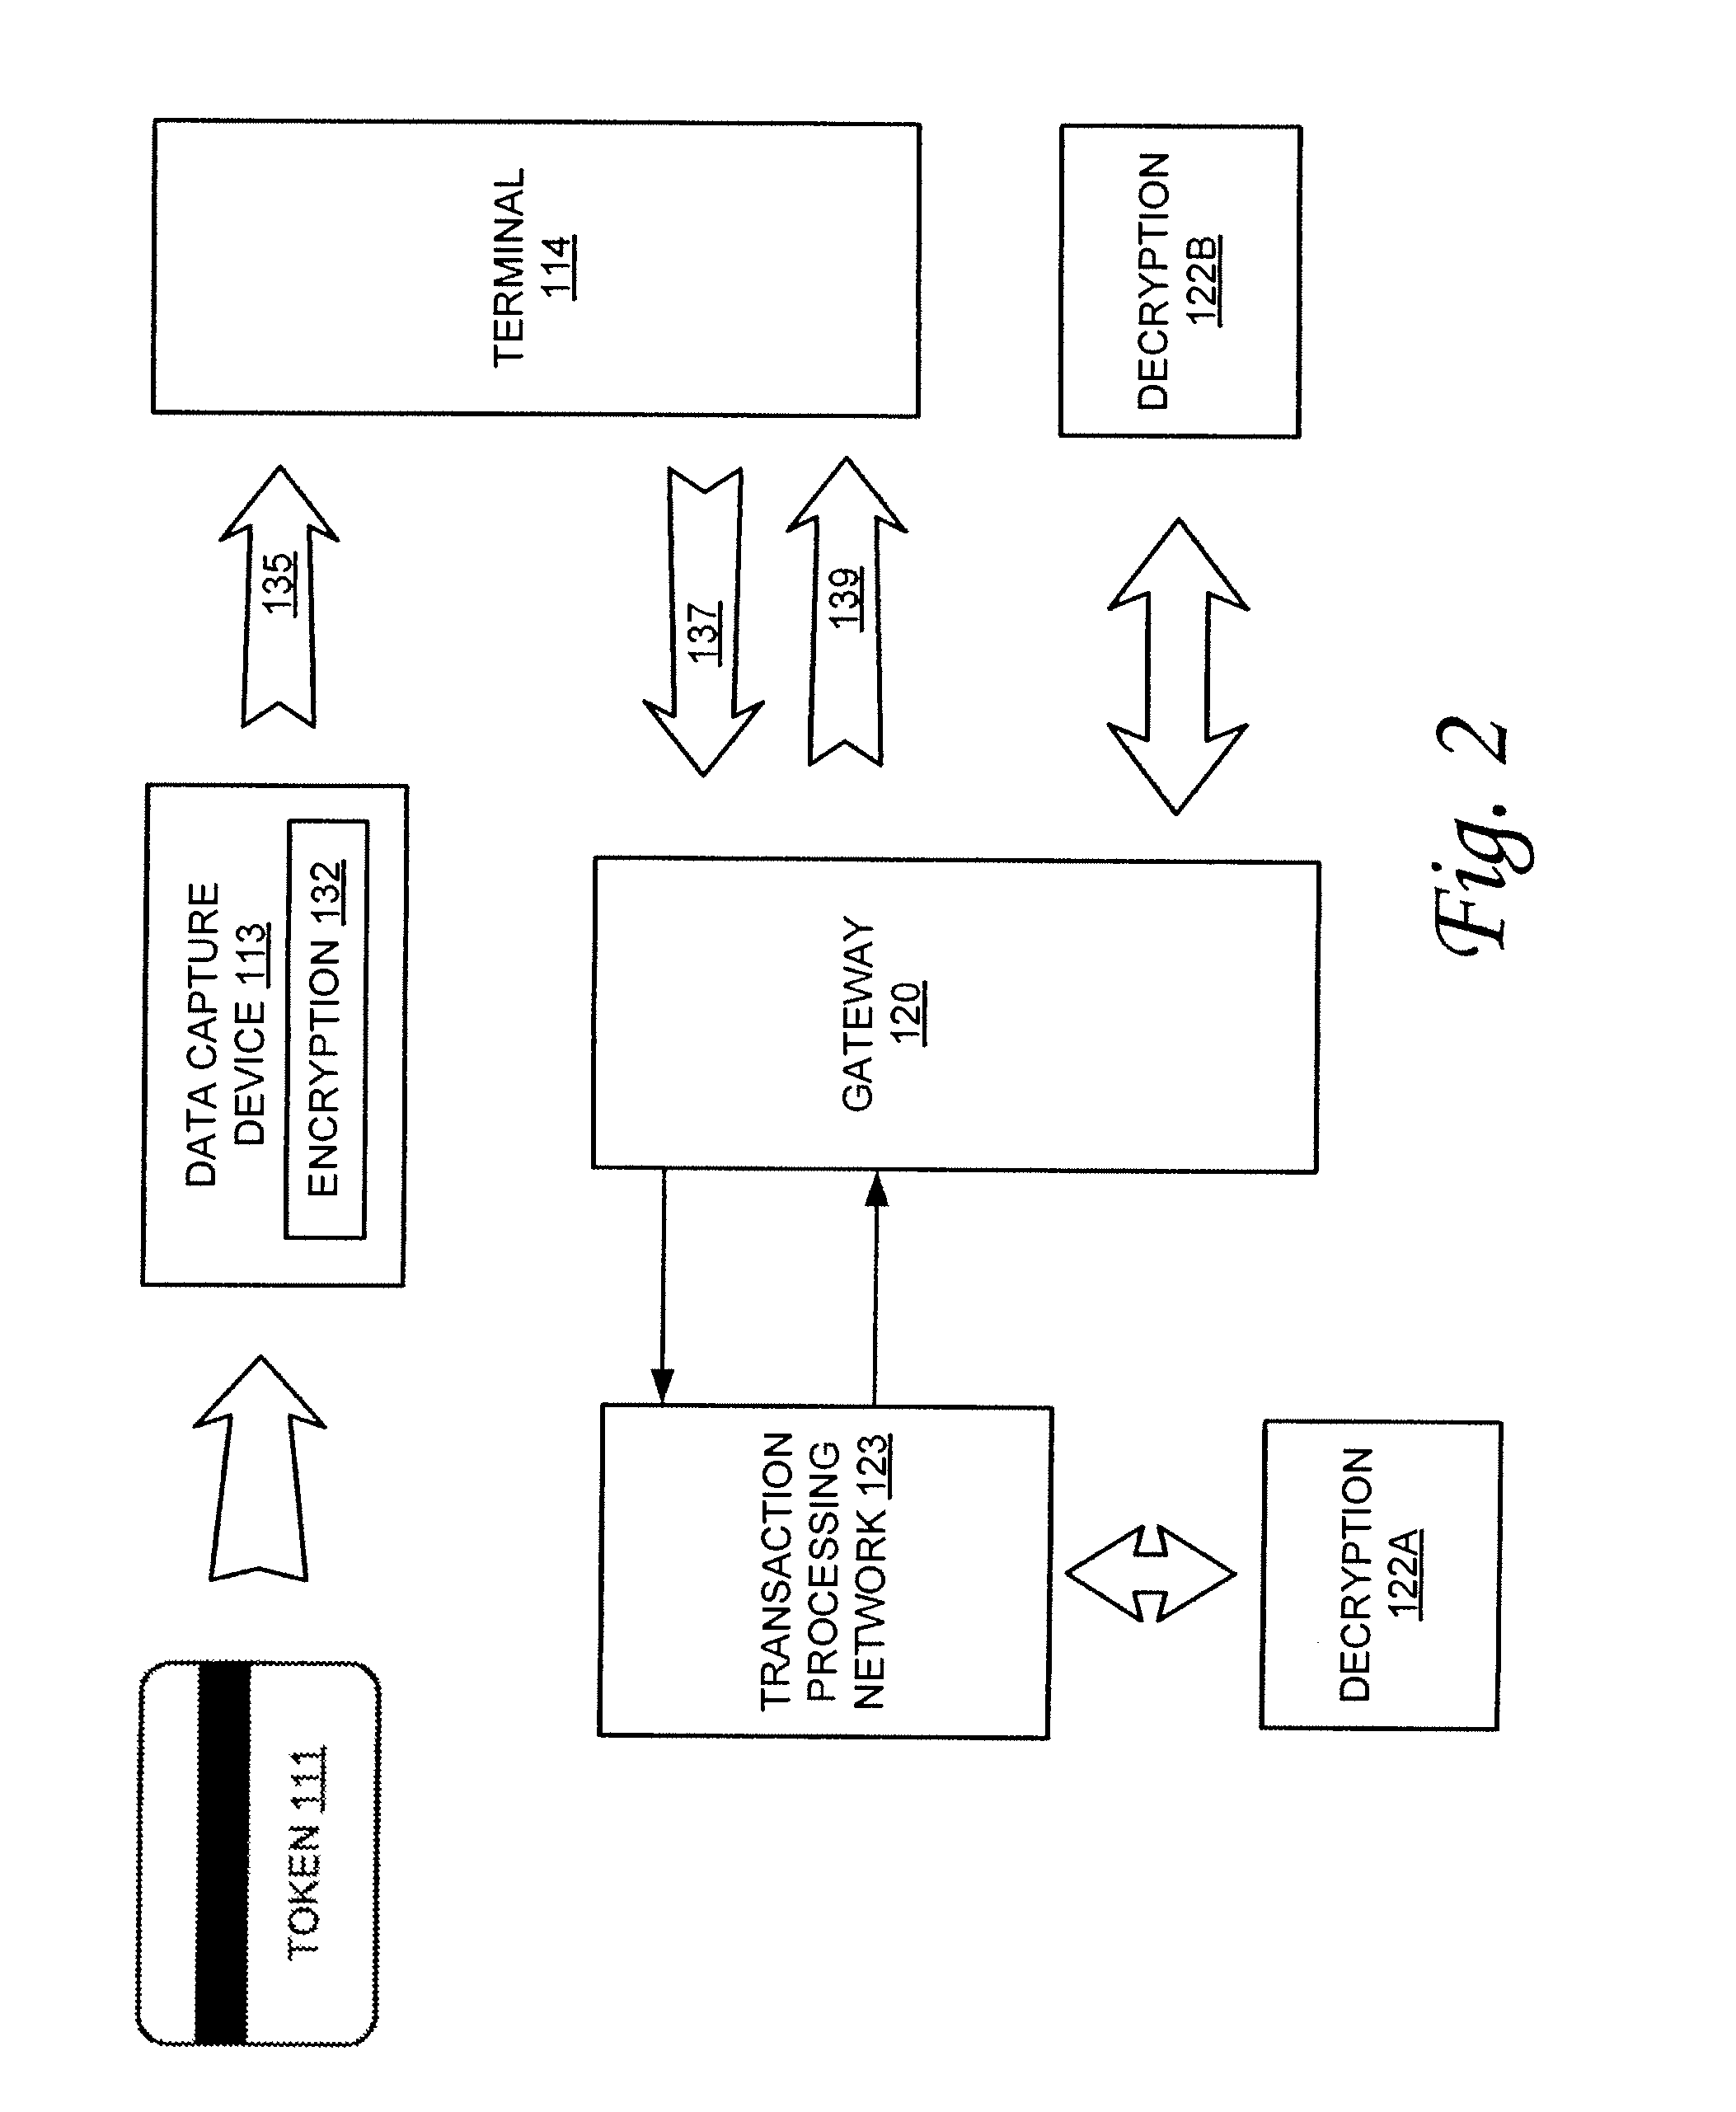 Variable-length cipher system and method